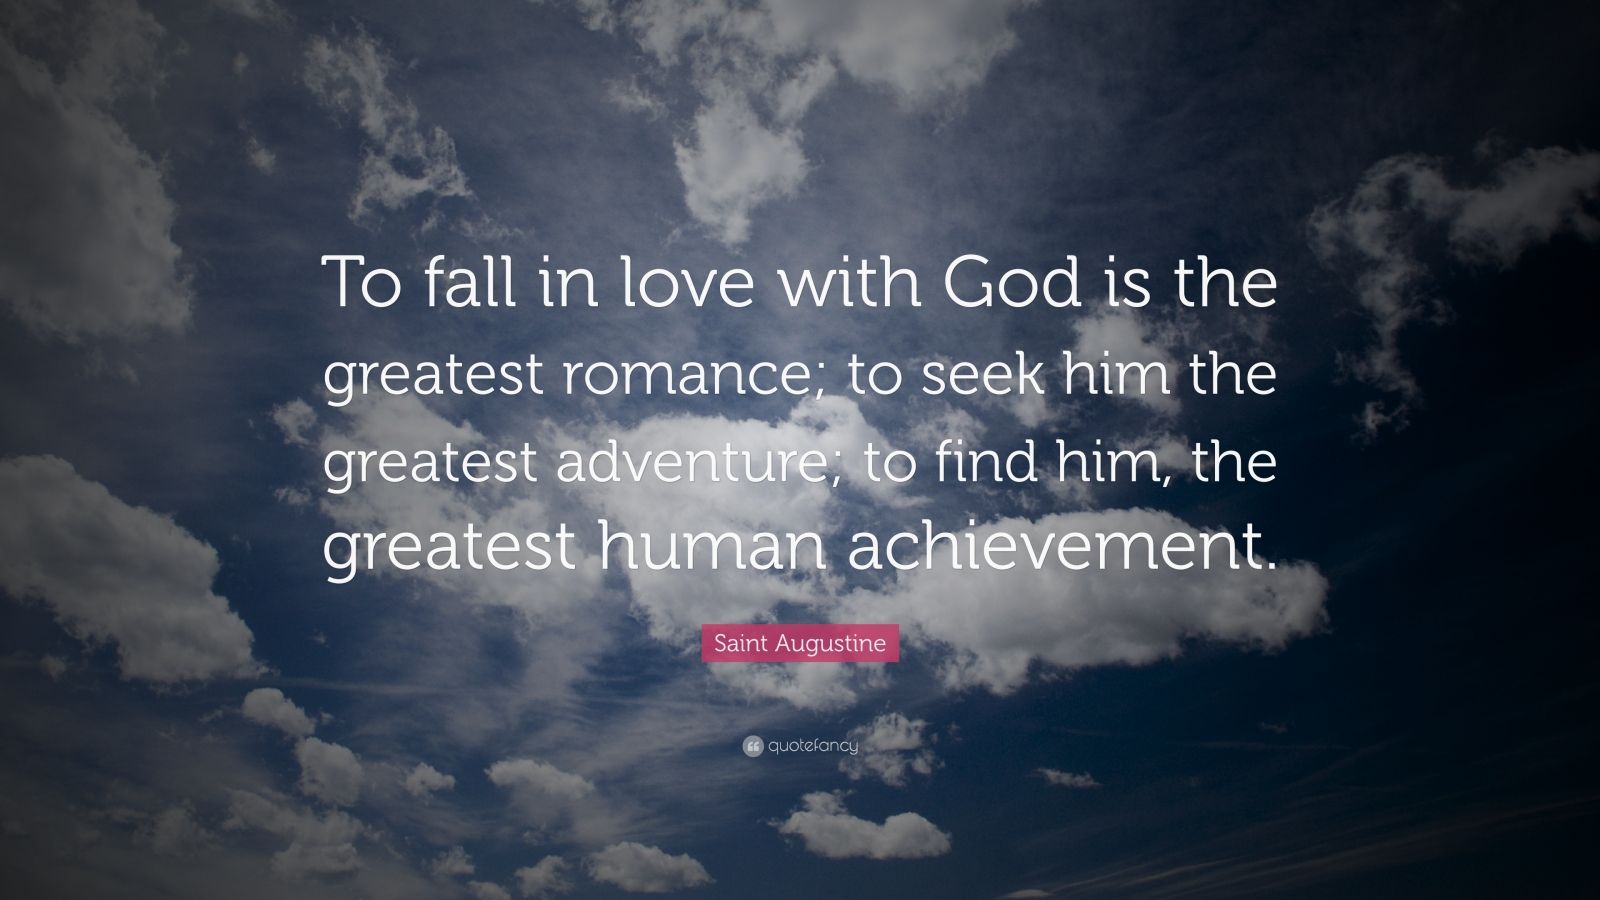 Saint Augustine Quote: “To fall in love with God is the greatest